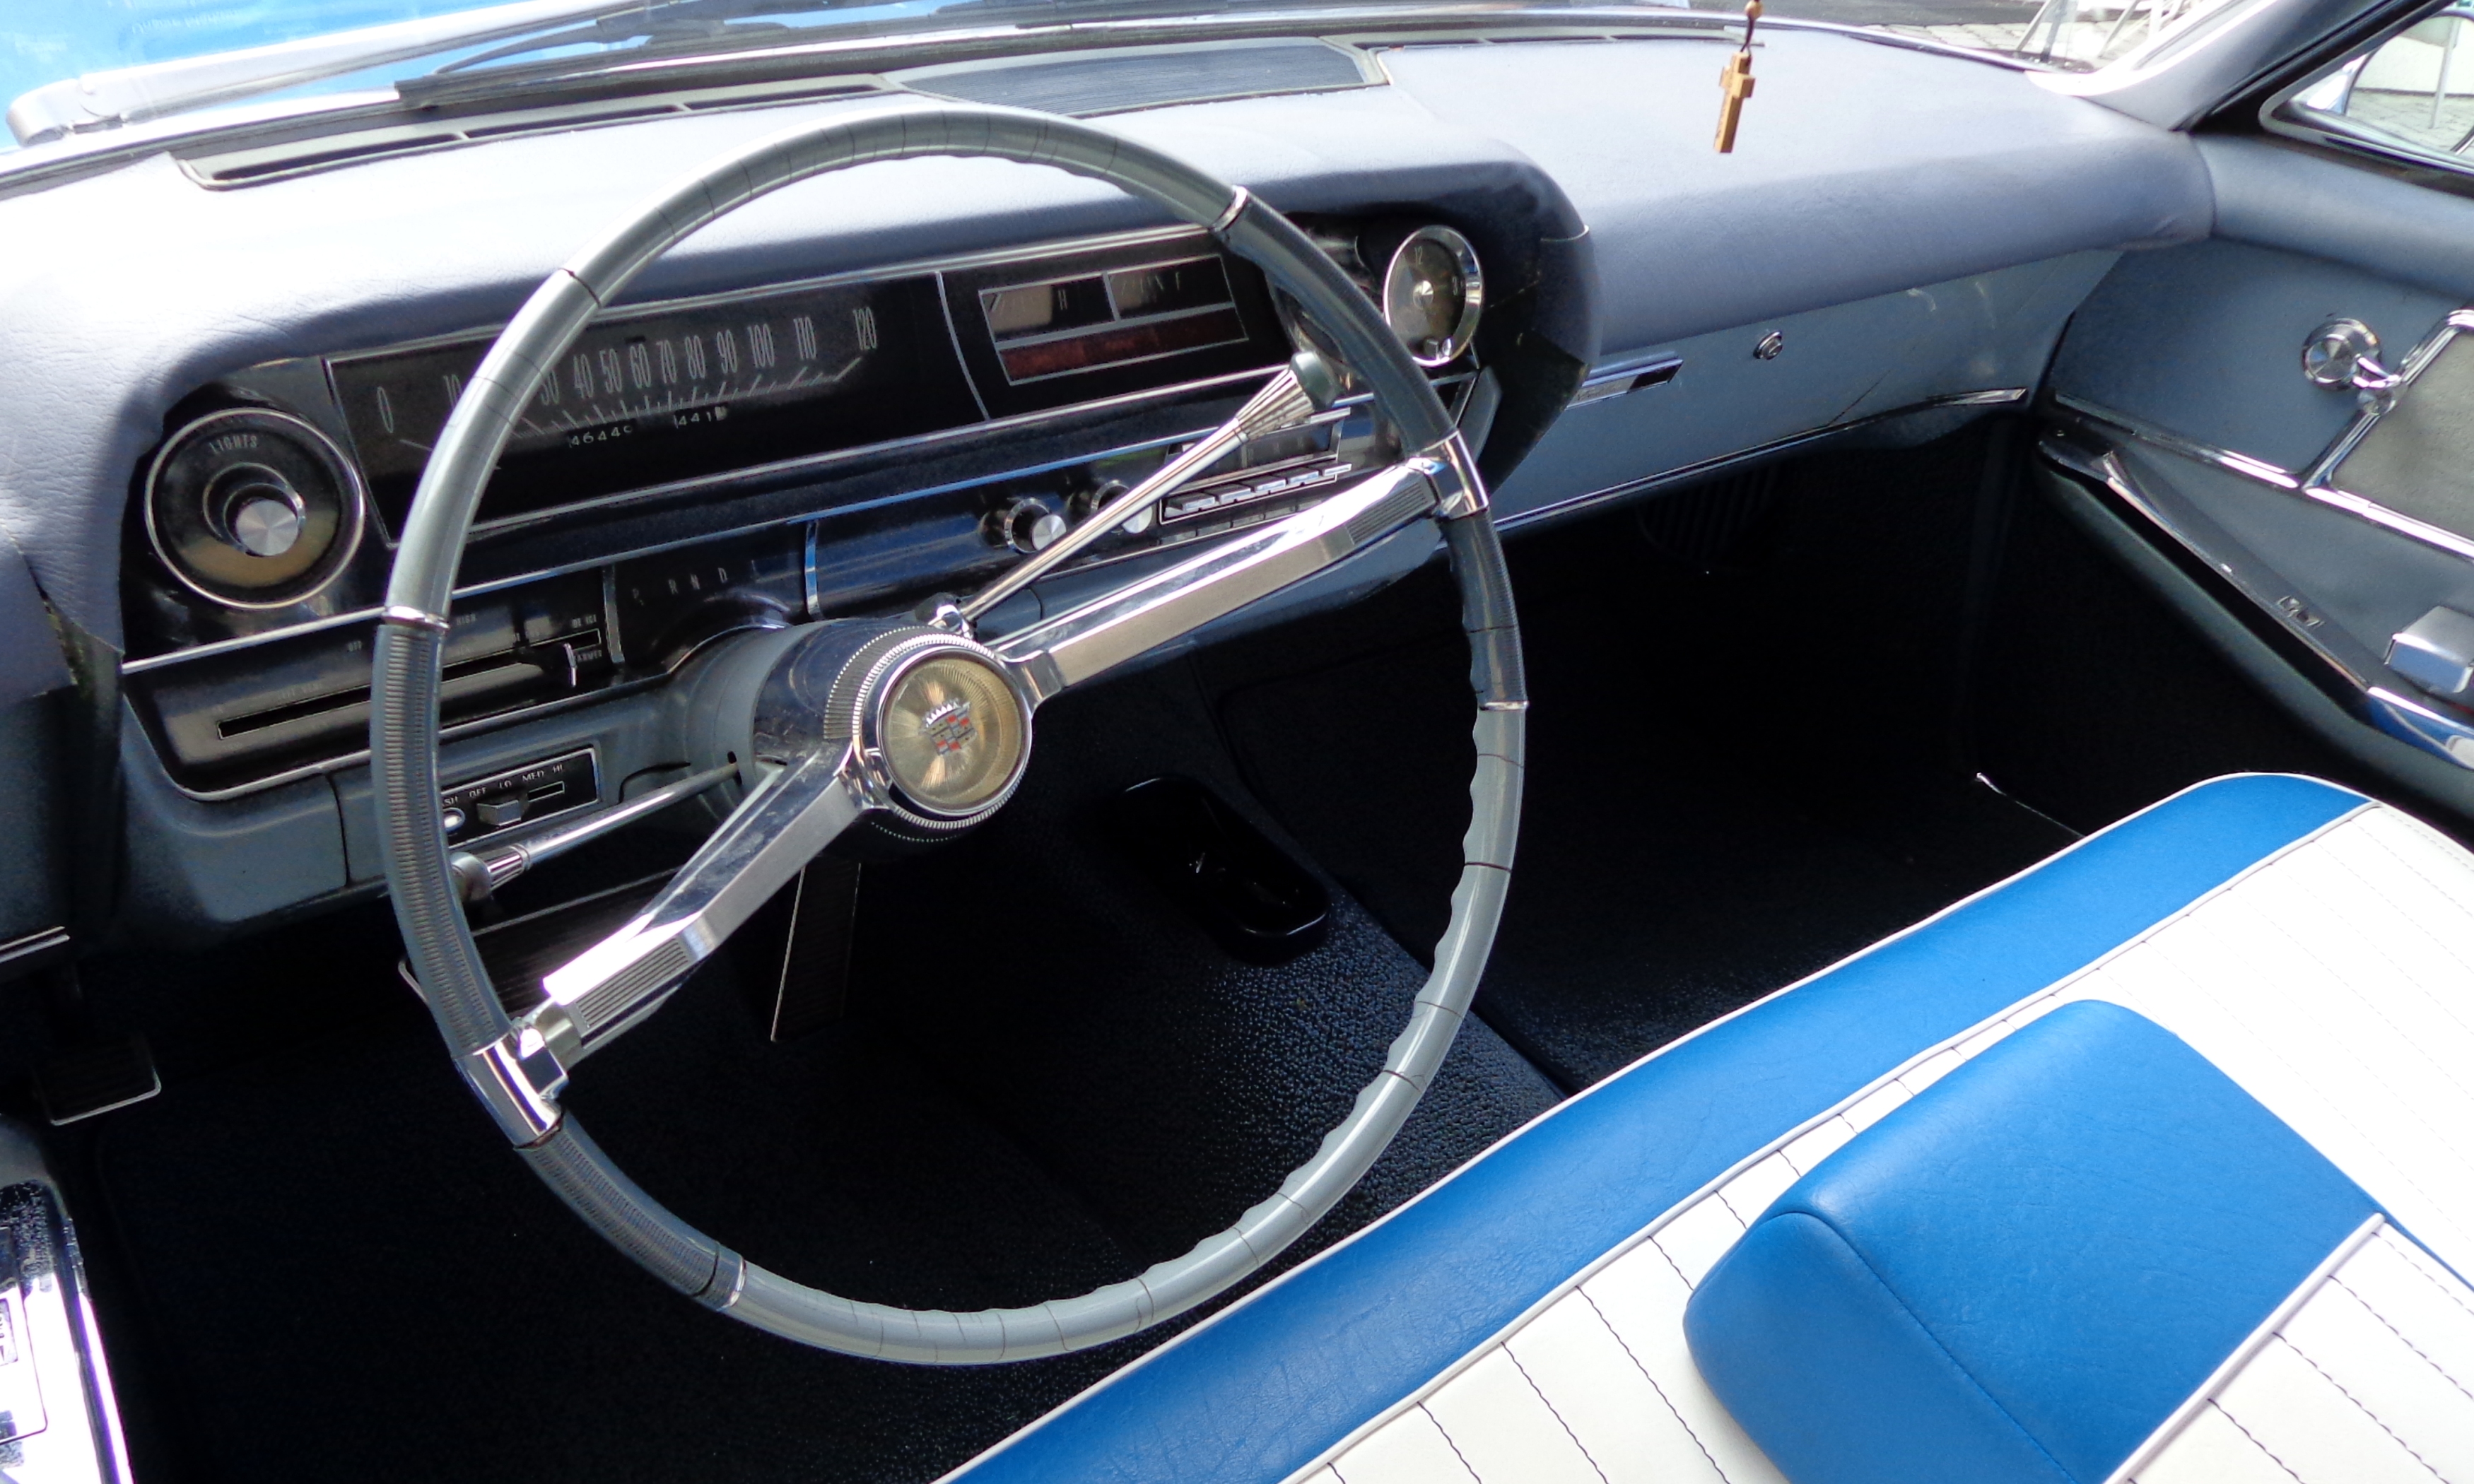 1963 Cadillac Coupe DeVille dashboard